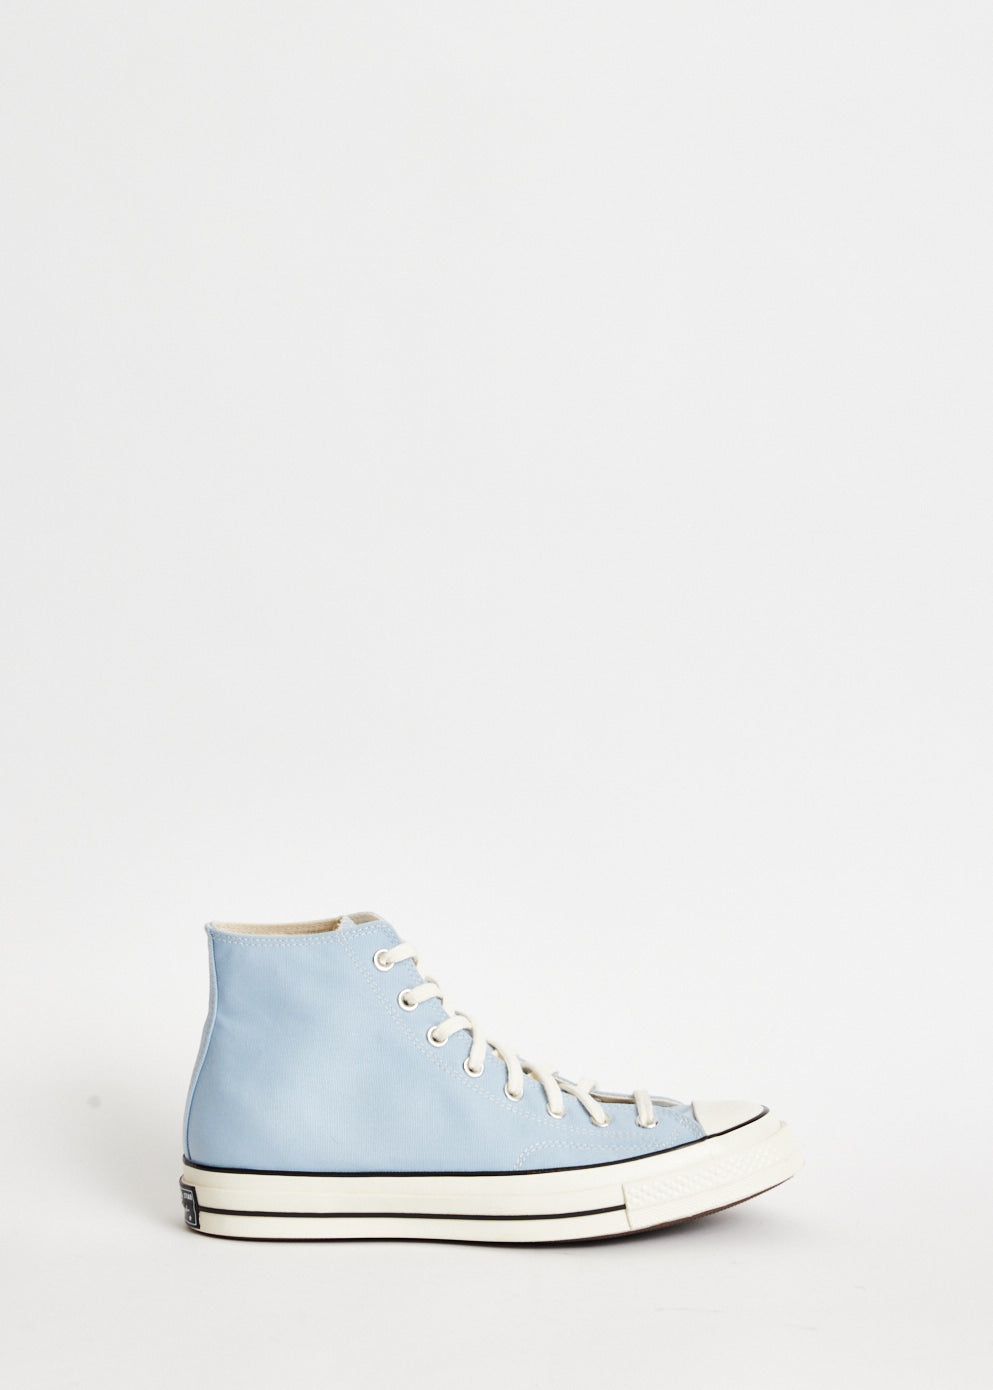 Chuck Taylor 70 No Waste High Top Sneakers